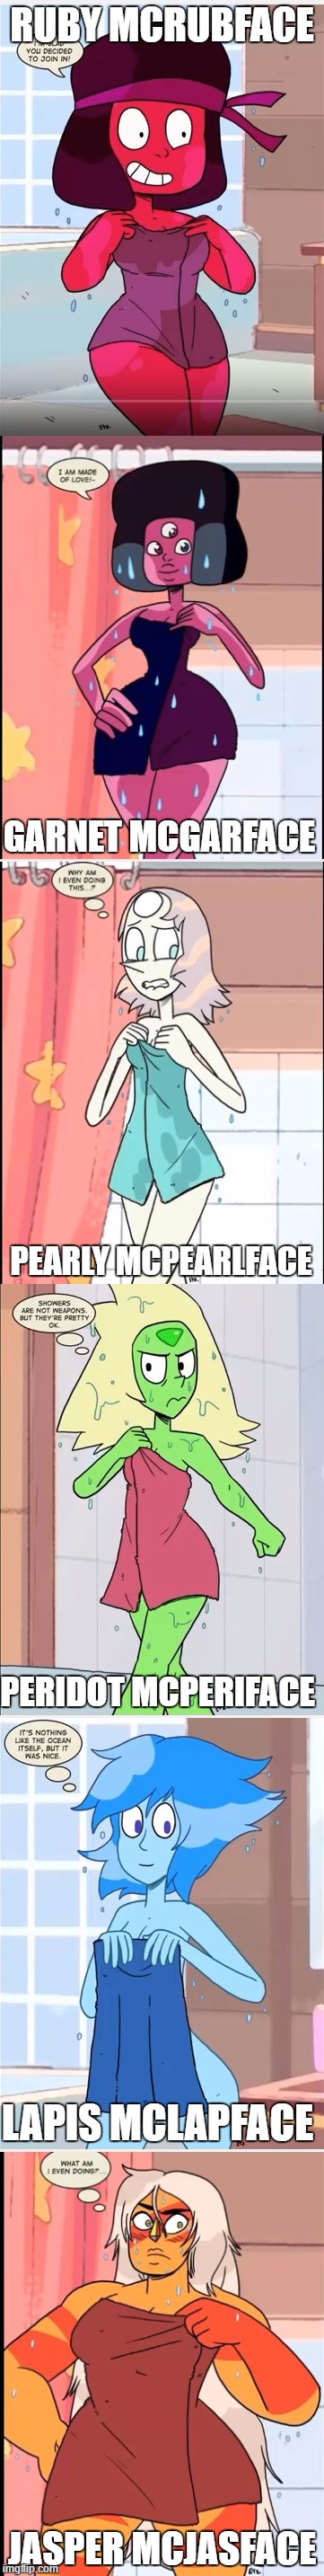 when i made a boaty mcboatface meme i maked this one | RUBY MCRUBFACE; GARNET MCGARFACE; PEARLY MCPEARLFACE; PERIDOT MCPERIFACE; LAPIS MCLAPFACE; JASPER MCJASFACE | image tagged in boaty mcboatface,steven universe,towel | made w/ Imgflip meme maker